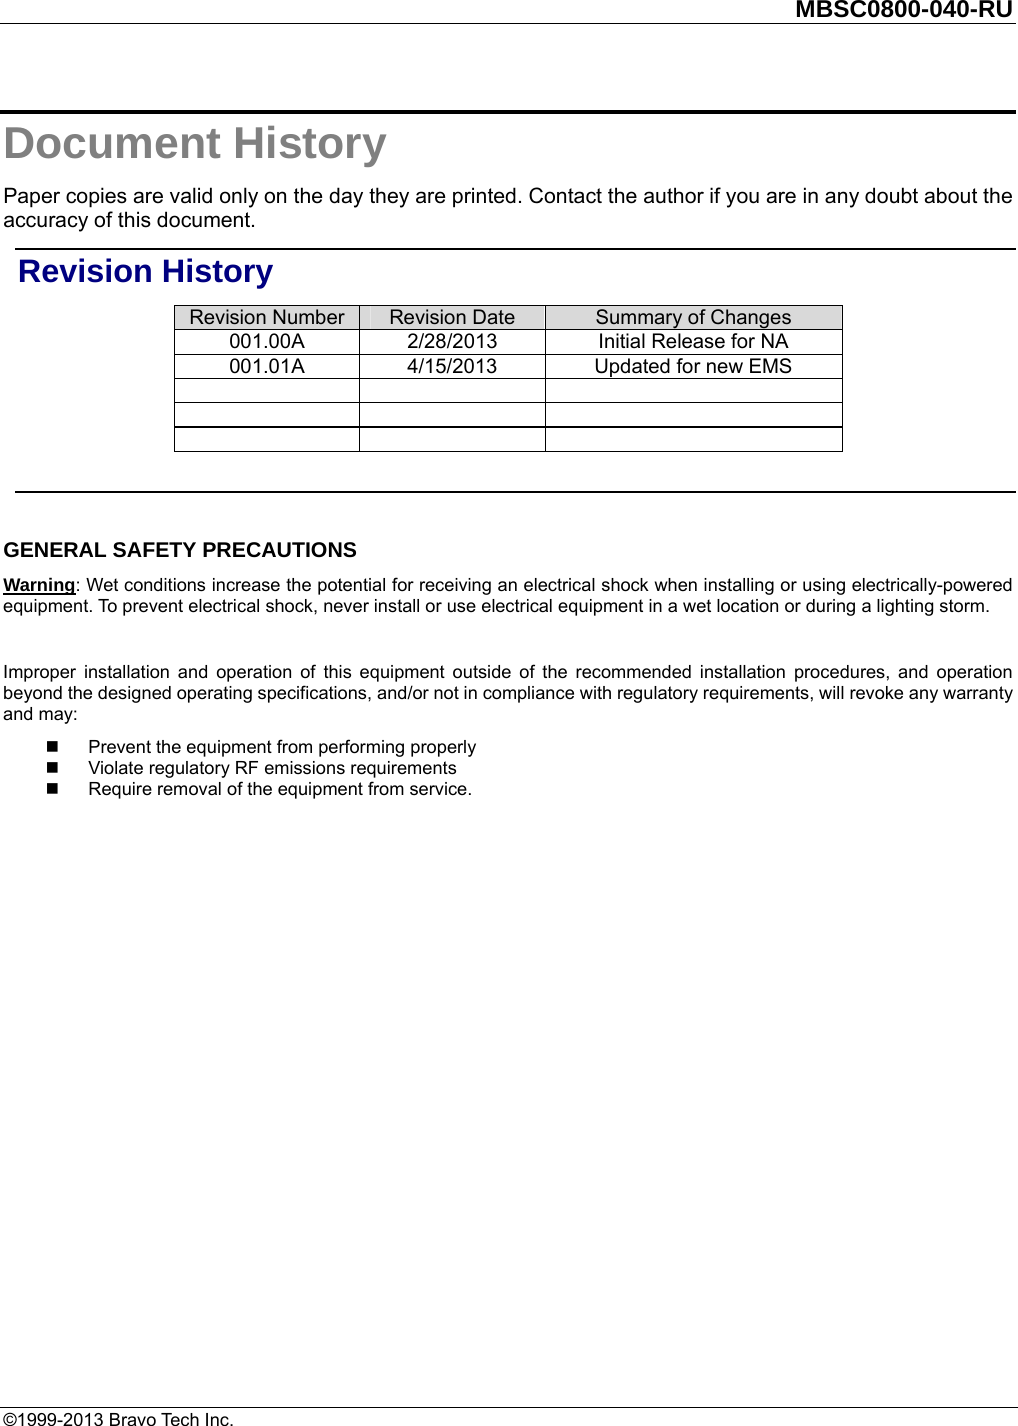         MBSC0800-040-RU   ©1999-2013 Bravo Tech Inc. Document History Paper copies are valid only on the day they are printed. Contact the author if you are in any doubt about the accuracy of this document. Revision History Revision Number  Revision Date  Summary of Changes 001.00A  2/28/2013  Initial Release for NA   001.01A  4/15/2013  Updated for new EMS                 GENERAL SAFETY PRECAUTIONS Warning: Wet conditions increase the potential for receiving an electrical shock when installing or using electrically-powered equipment. To prevent electrical shock, never install or use electrical equipment in a wet location or during a lighting storm.  Improper installation and operation of this equipment outside of the recommended installation procedures, and operation beyond the designed operating specifications, and/or not in compliance with regulatory requirements, will revoke any warranty and may:   Prevent the equipment from performing properly   Violate regulatory RF emissions requirements   Require removal of the equipment from service.  